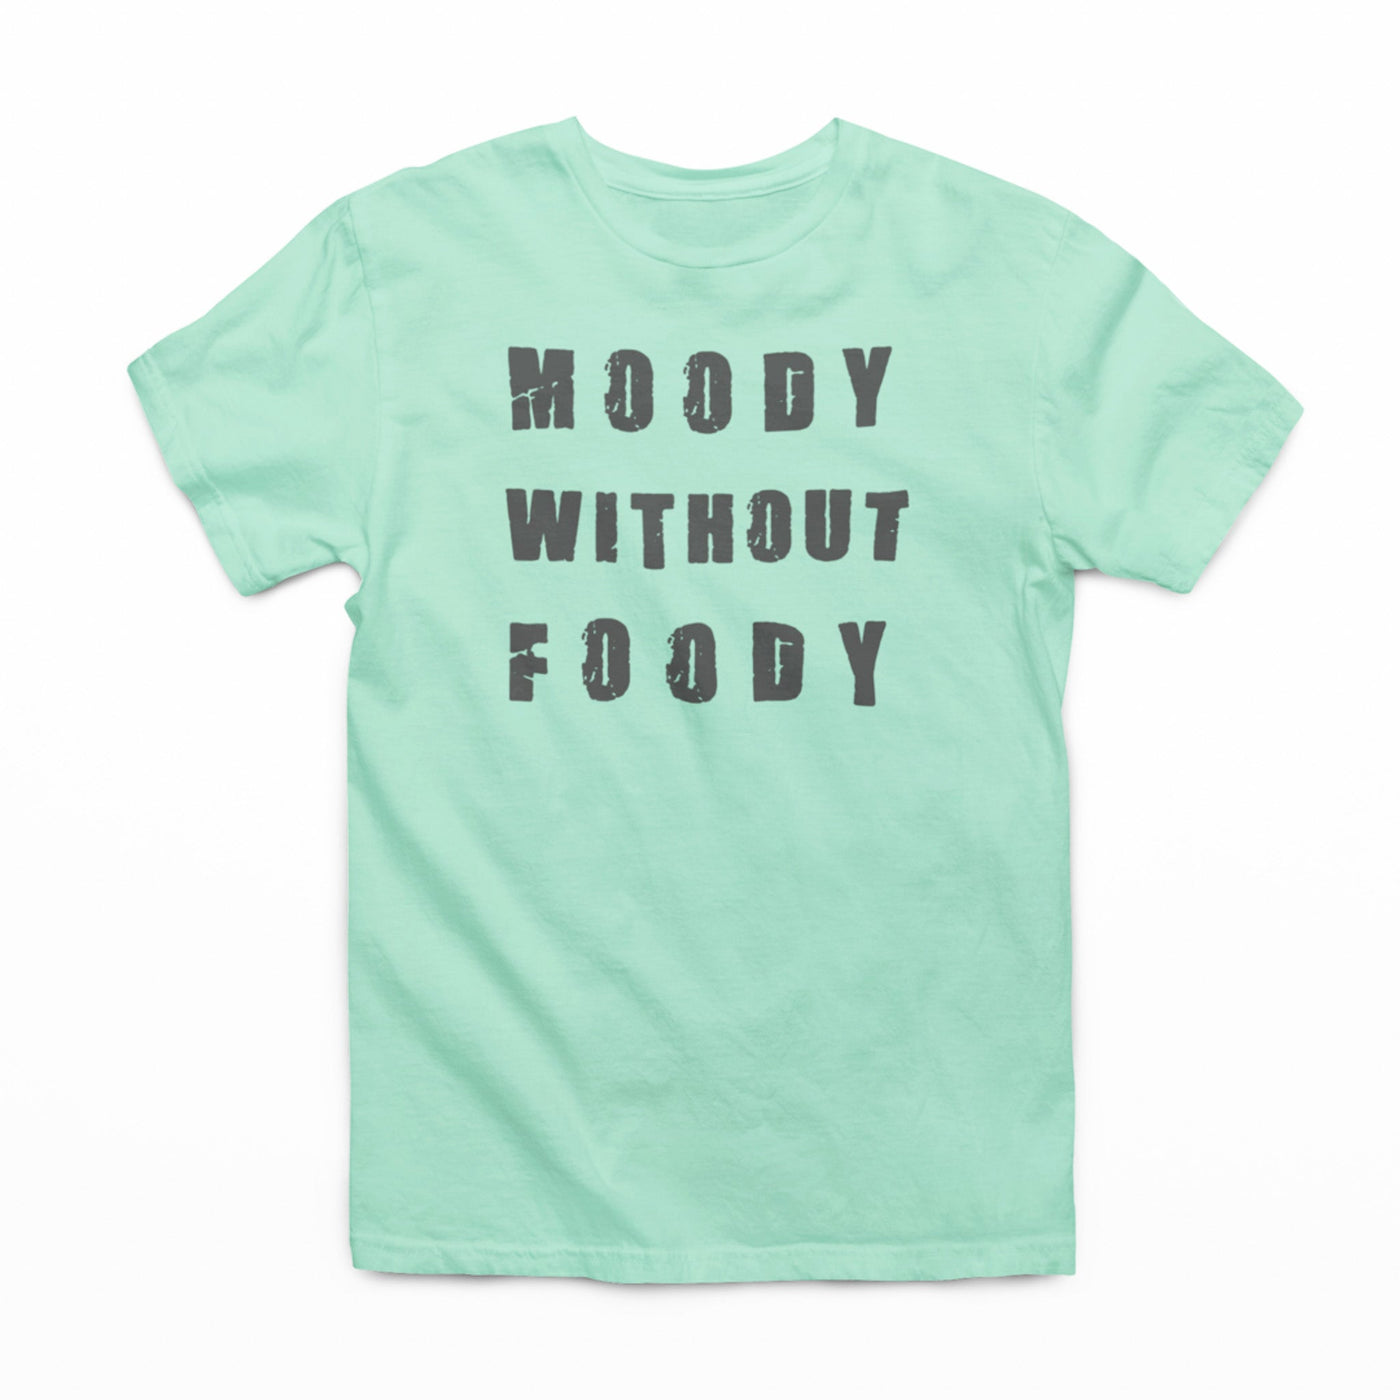 Moody Without Foody Graphic Tee *5 colors*